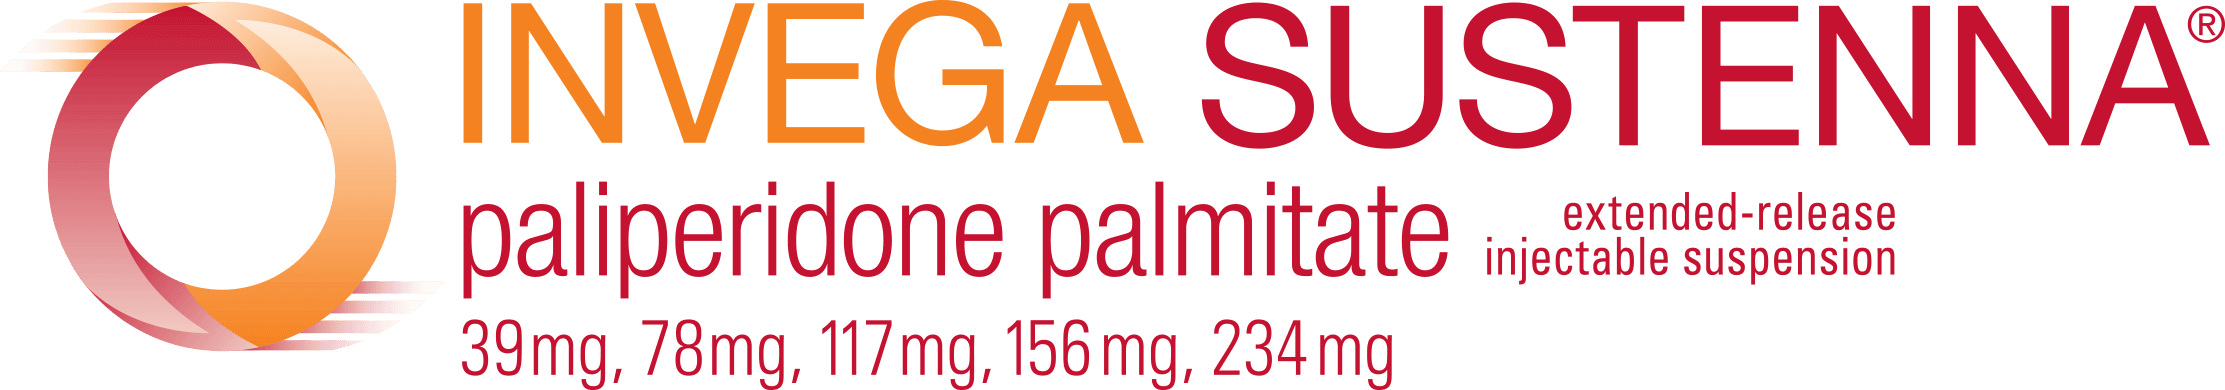 INVEGA SUSTENNA® (paliperidone palmitate) extended-release injectable suspension